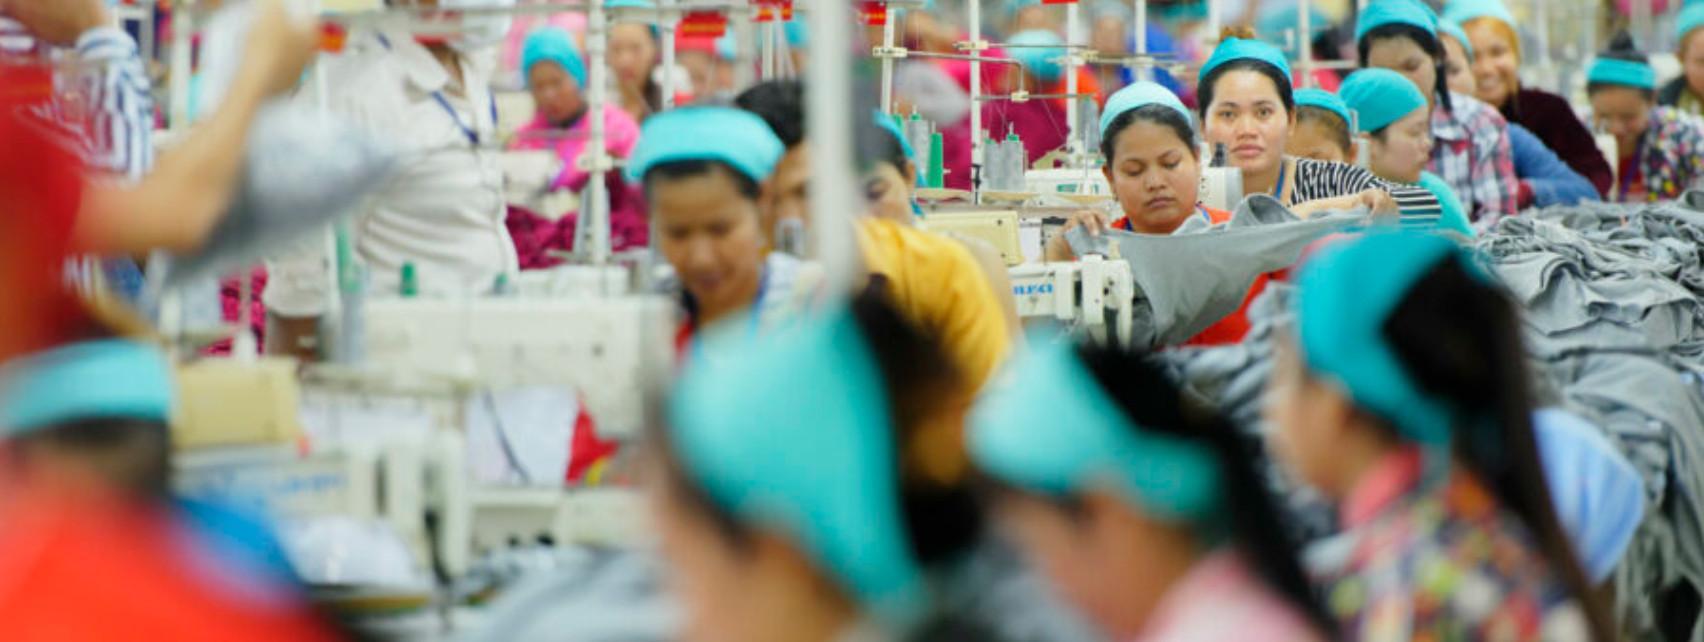 Better Work works: driving Cambodia’s garment industry toward positive change